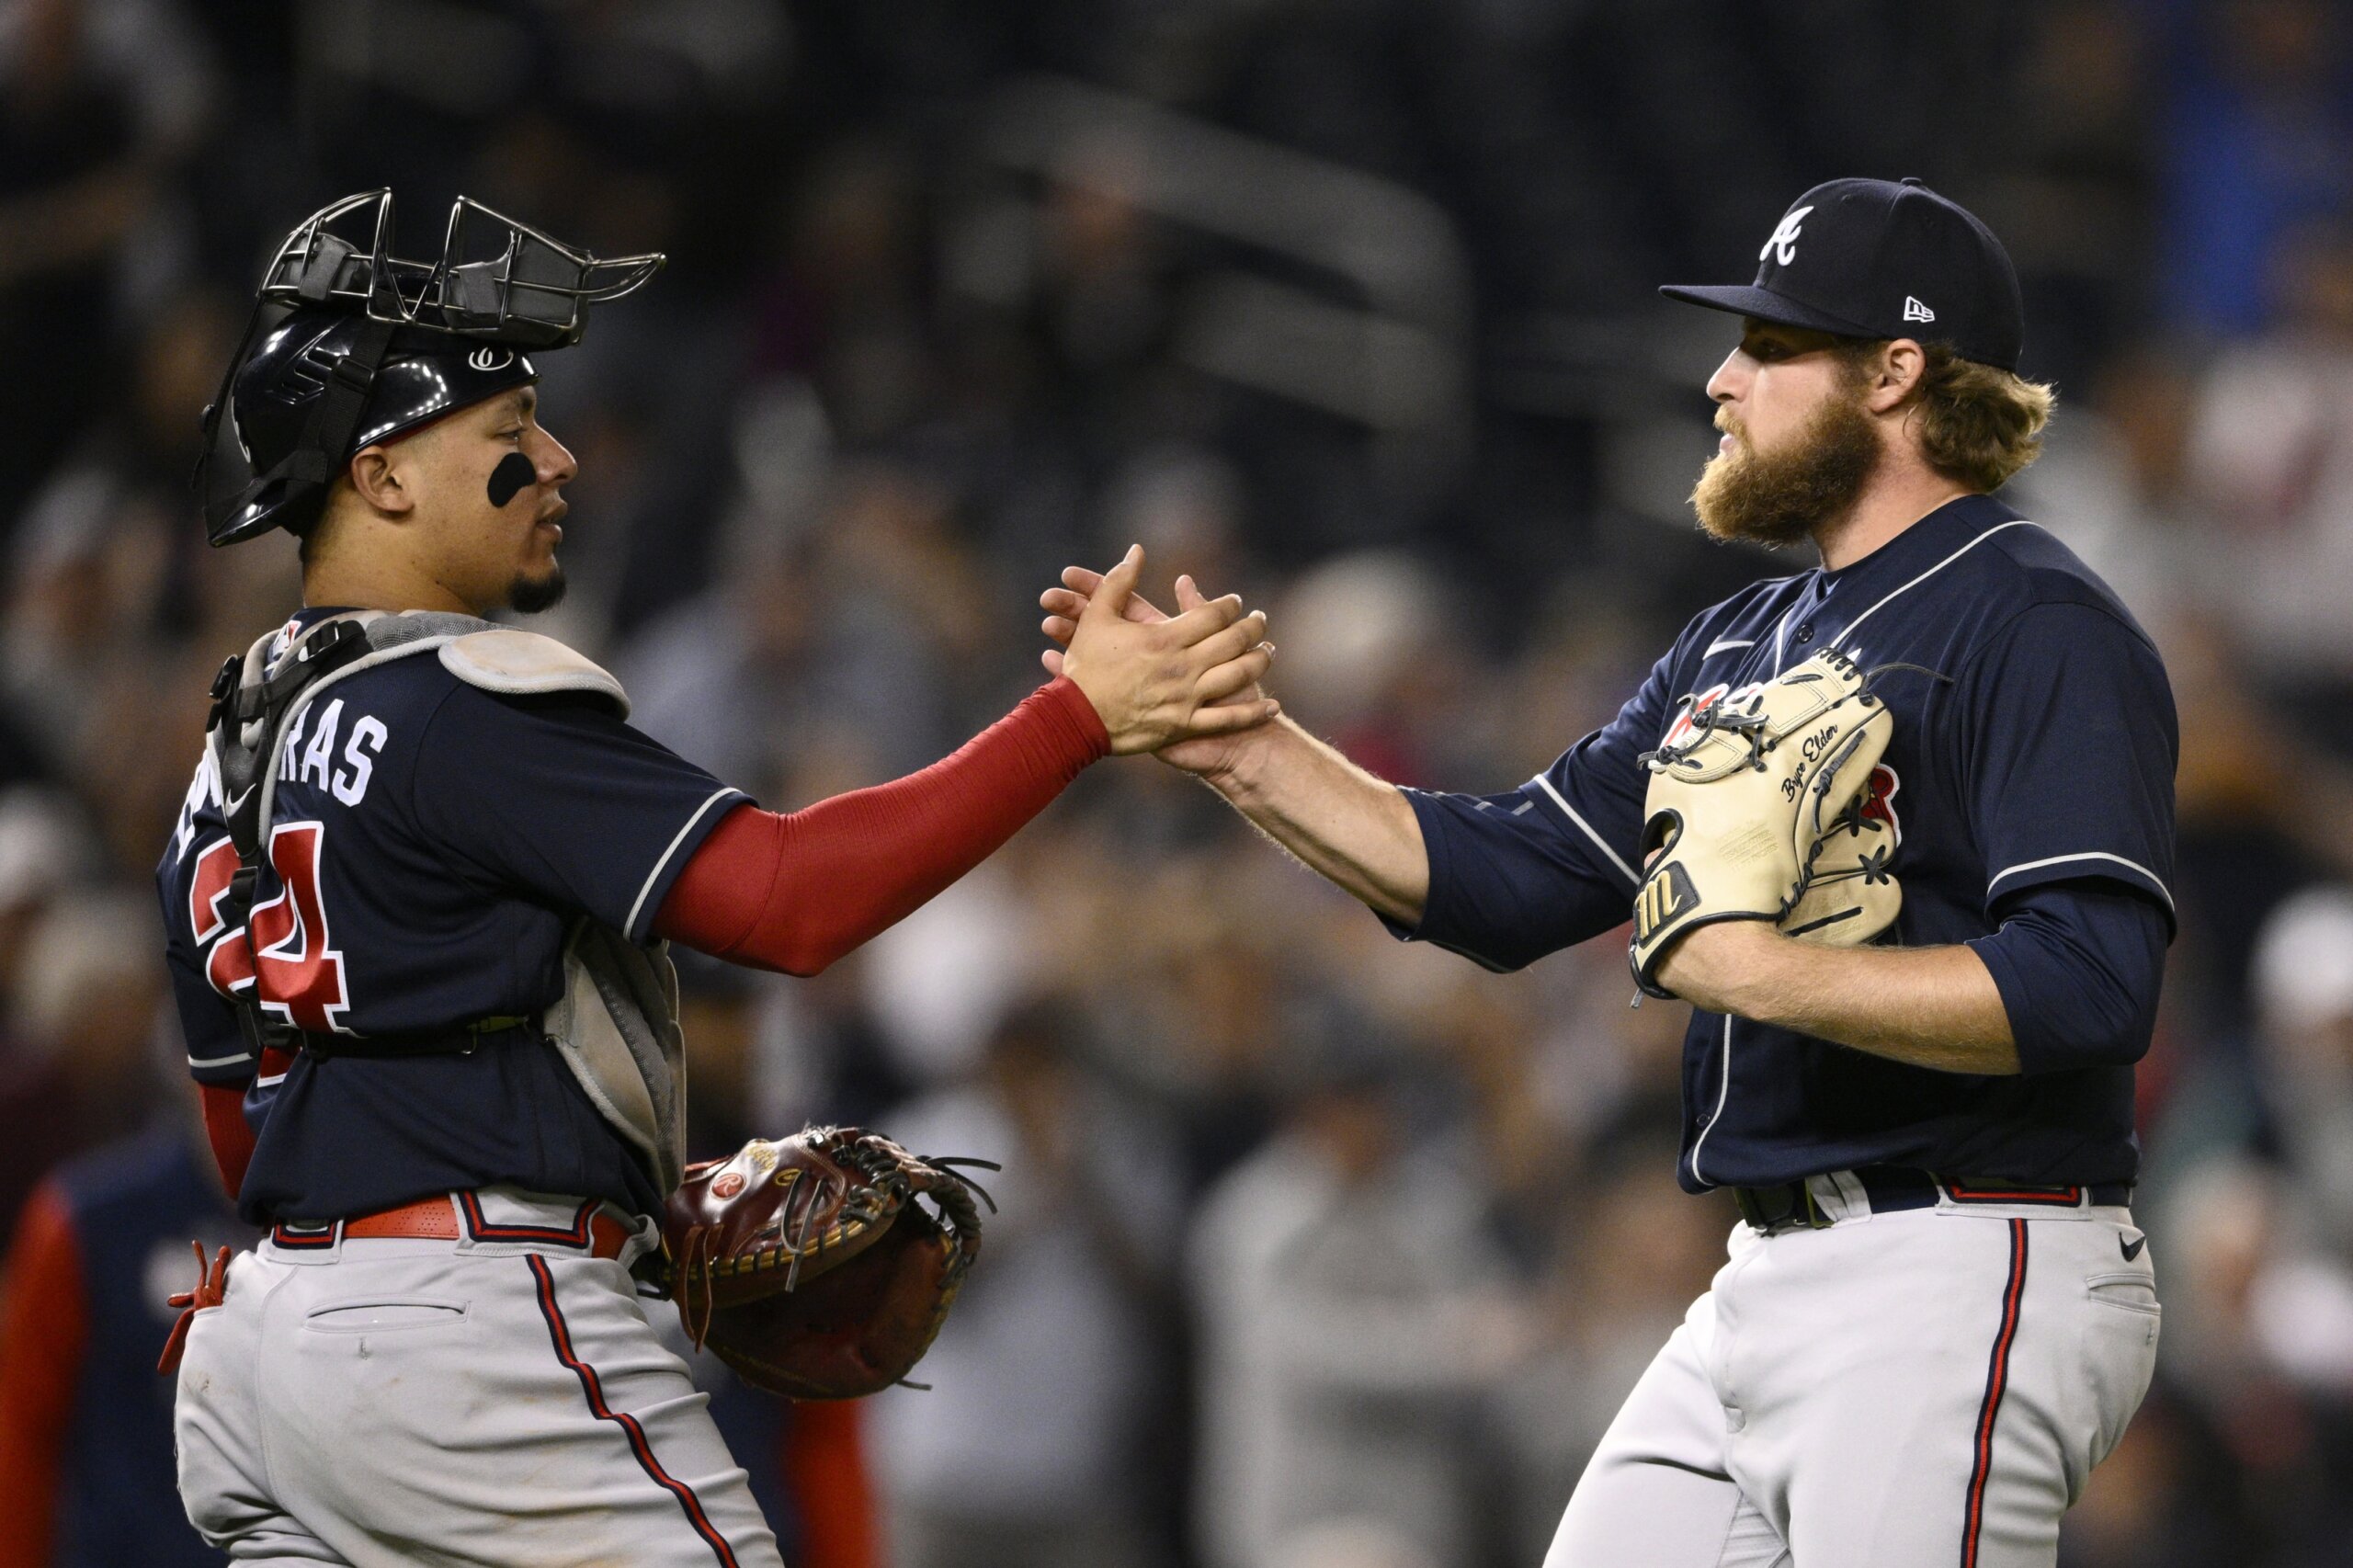 Braves vs. Nationals recap: Hey, another comeback yields 3-2 win